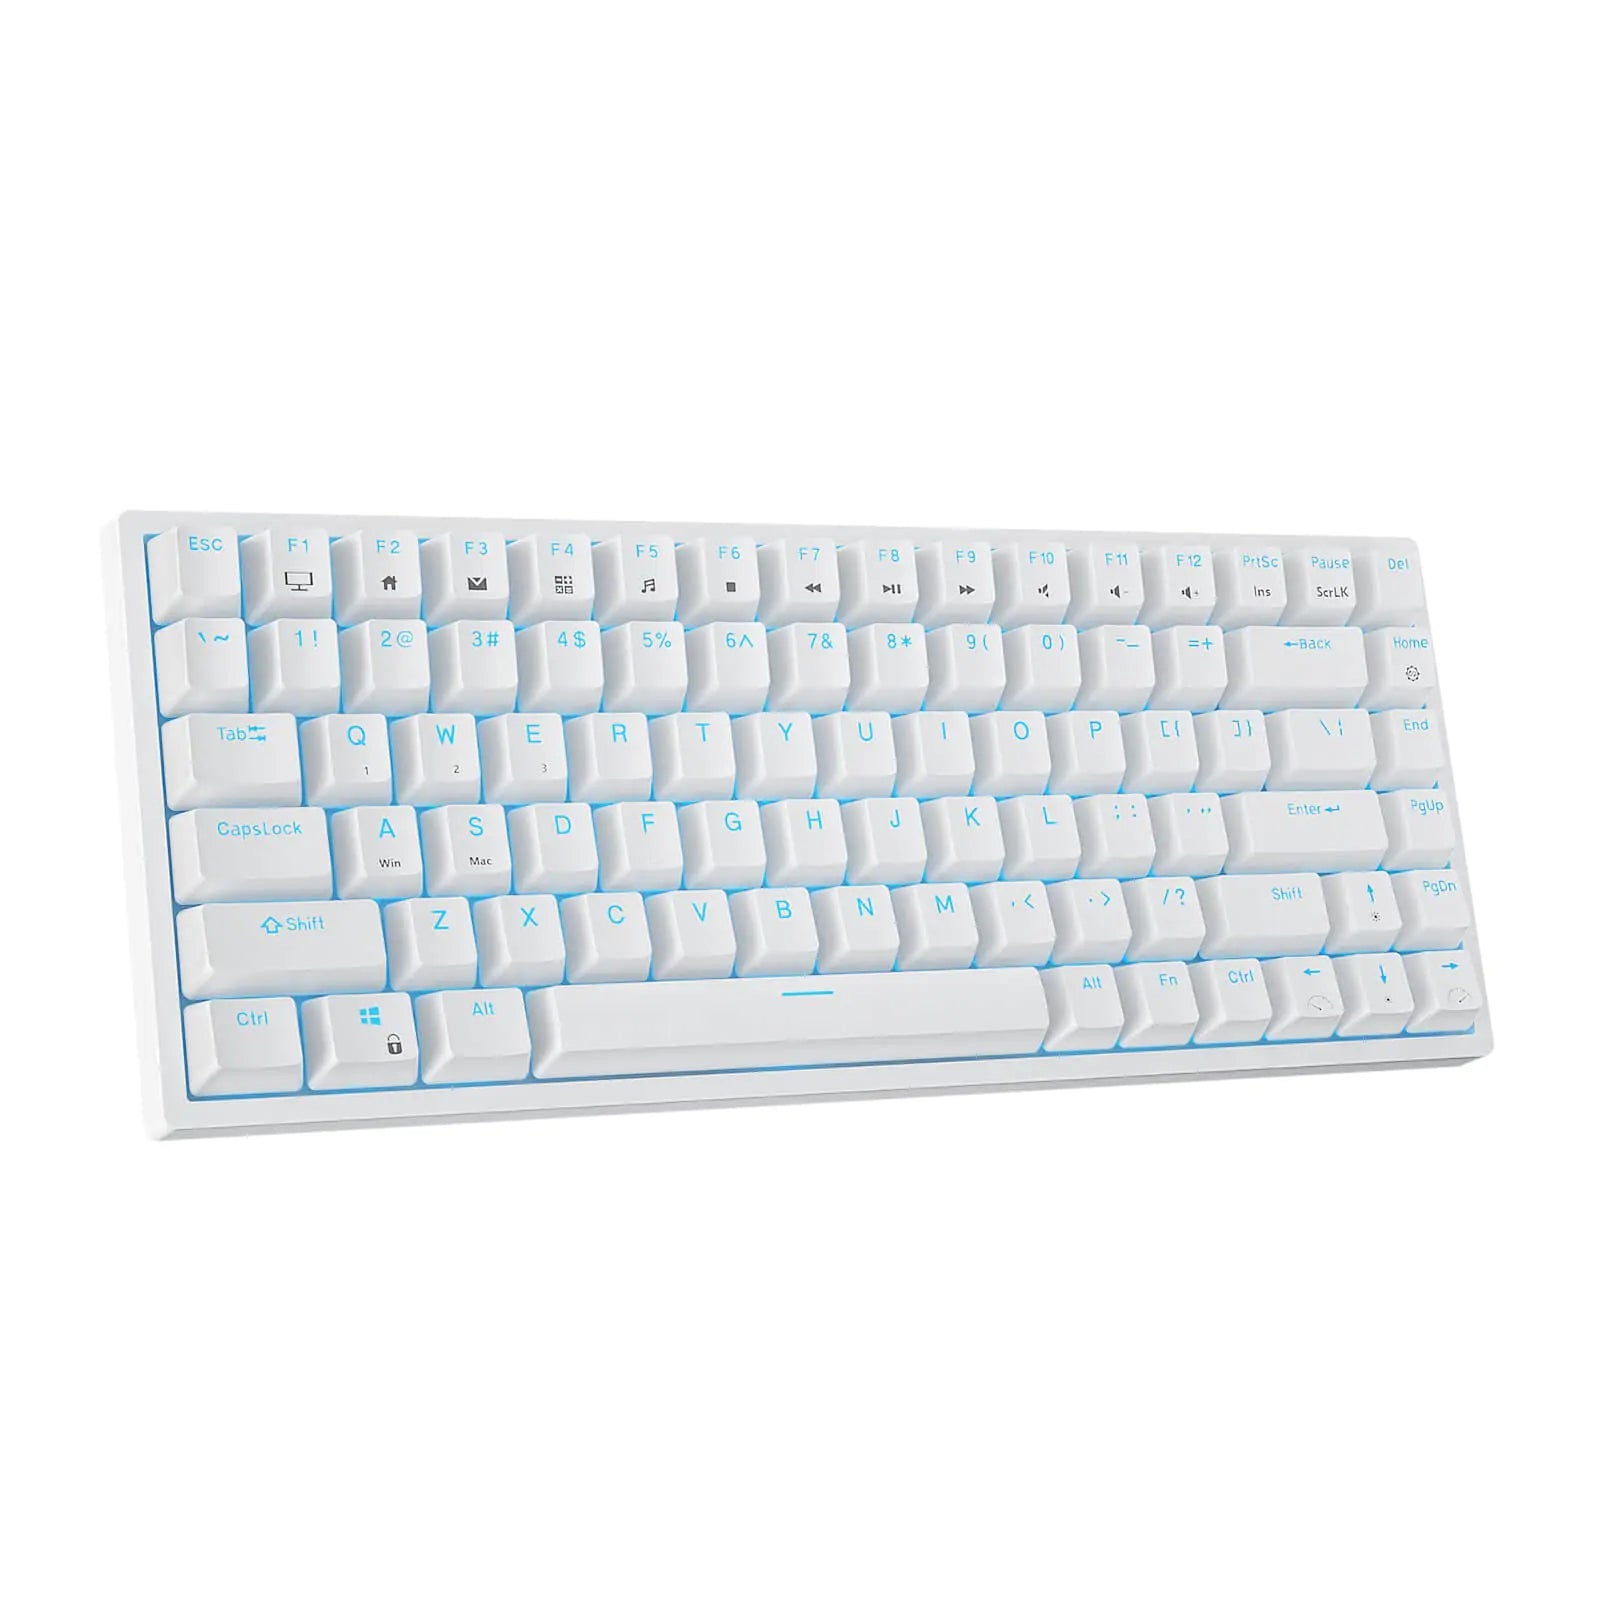 RK ROYAL KLUDGE RK84 Blue Backlit 75% Triple Mode BT5.0/2.4G/USB-C Hot Swappable Mechanical Keyboard - Brown Switch